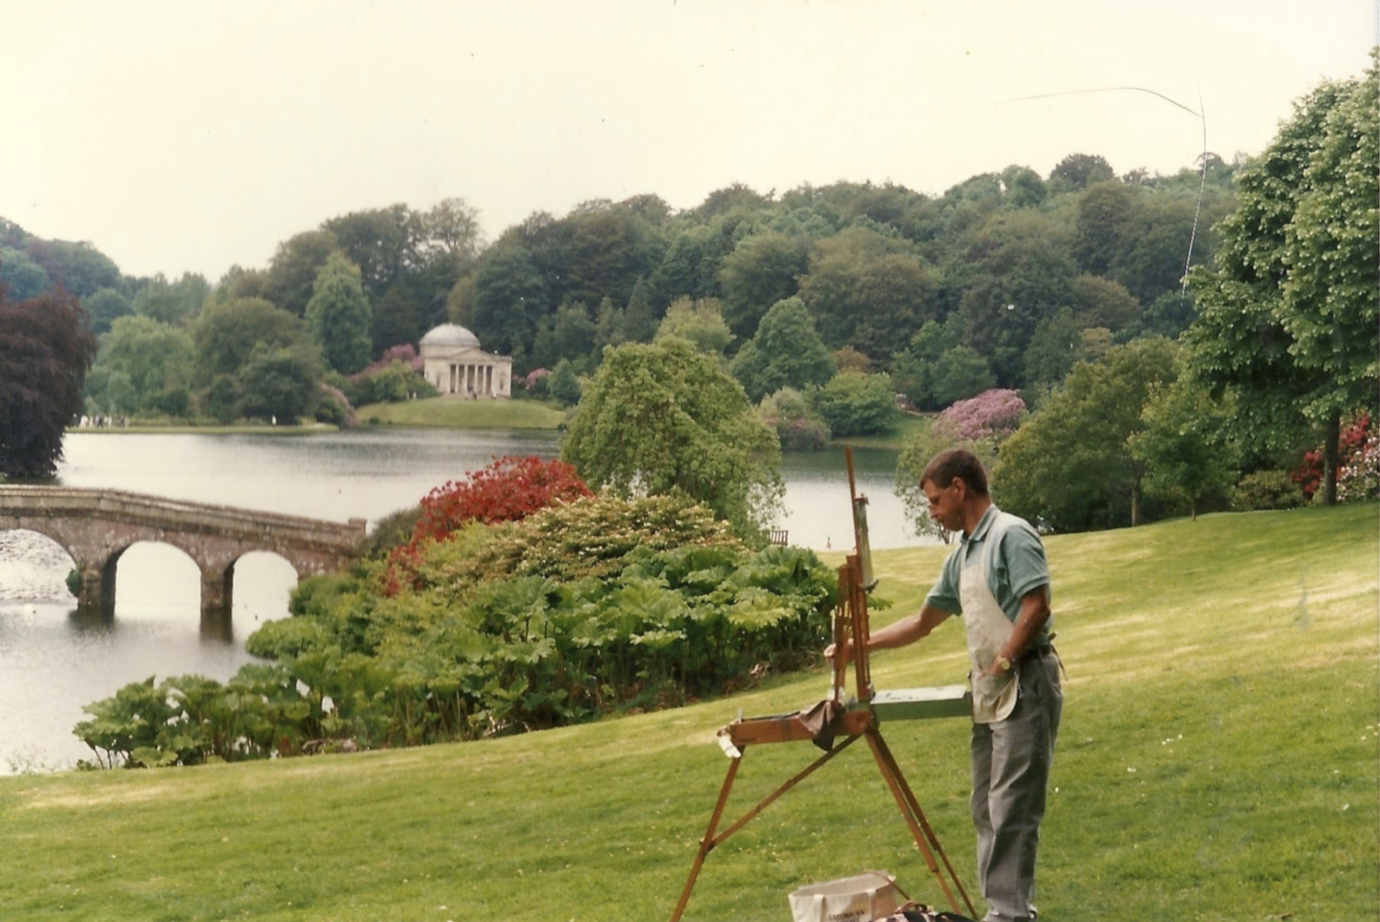 Stephen Doherty painting at Stourhead in Wiltshire, England in the 1990s